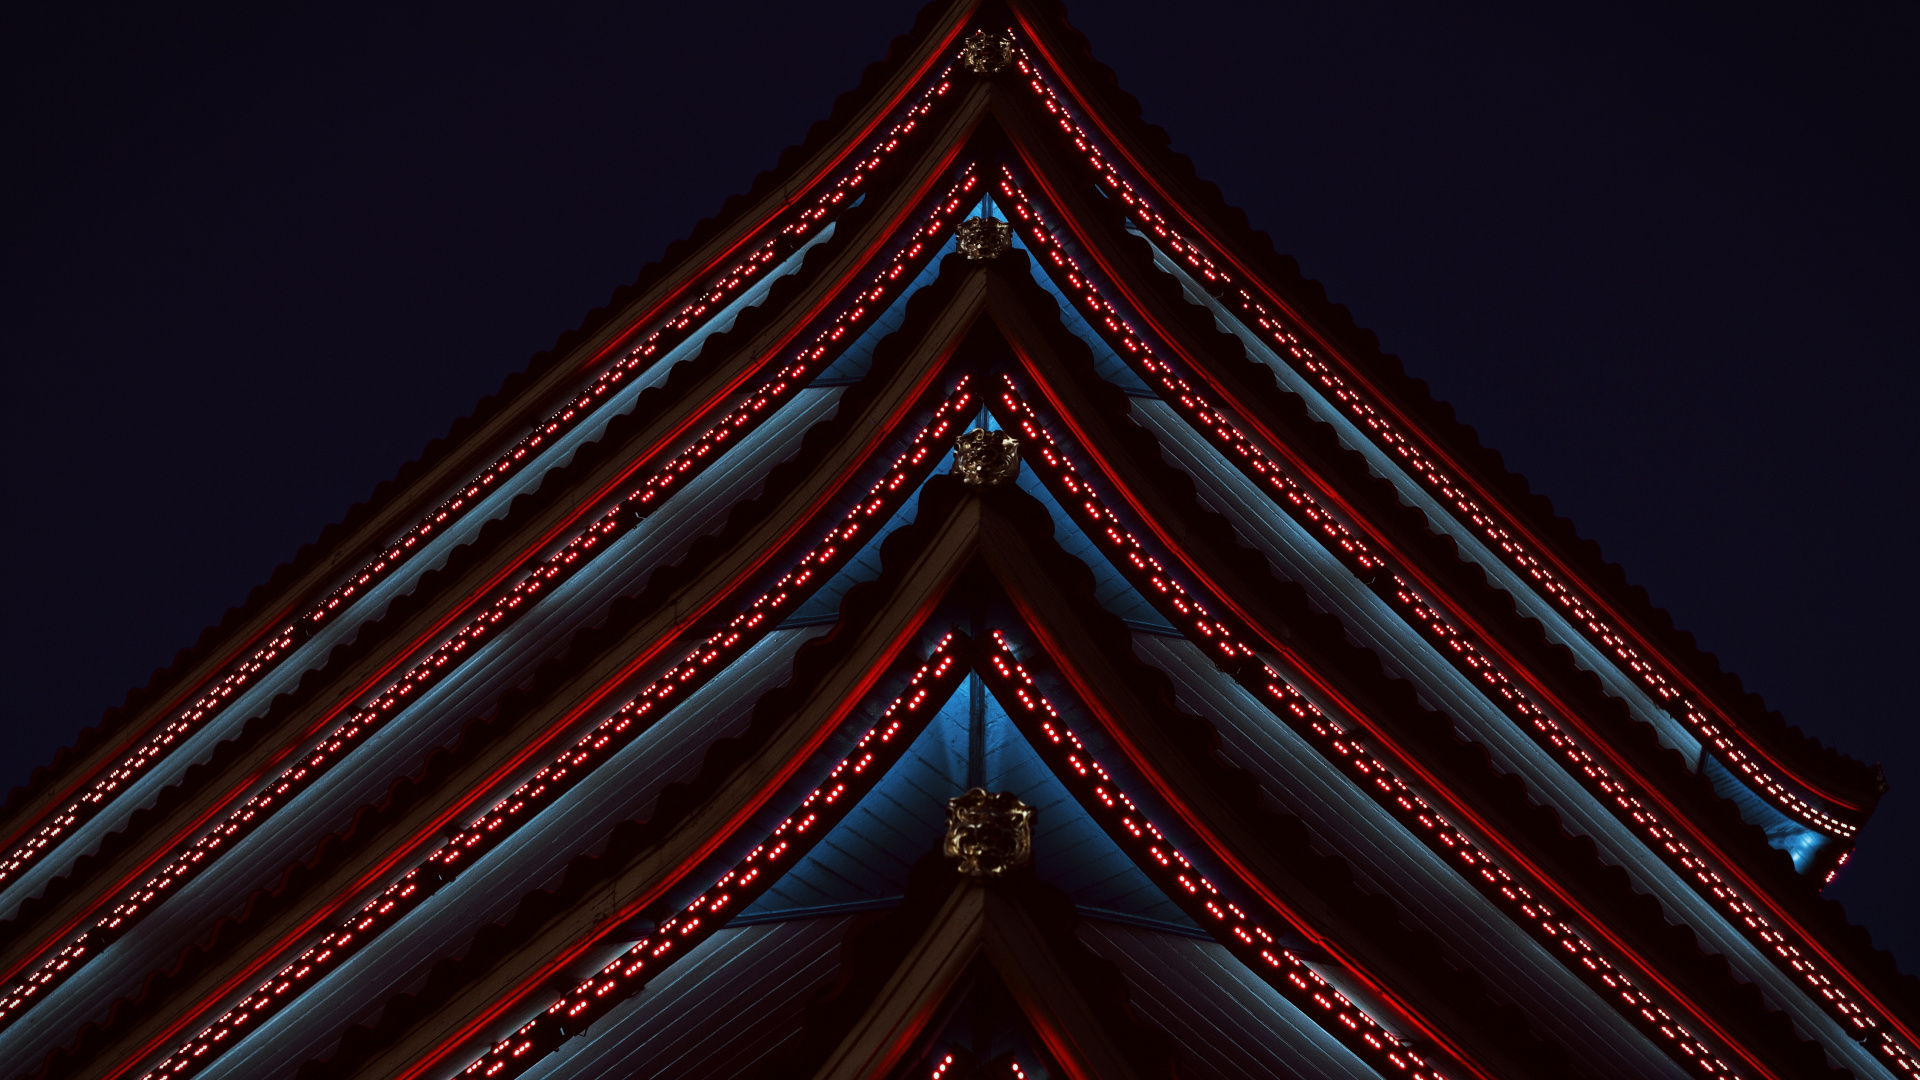 Red and Gold Colored Roof. Wallpaper in 1920x1080 Resolution